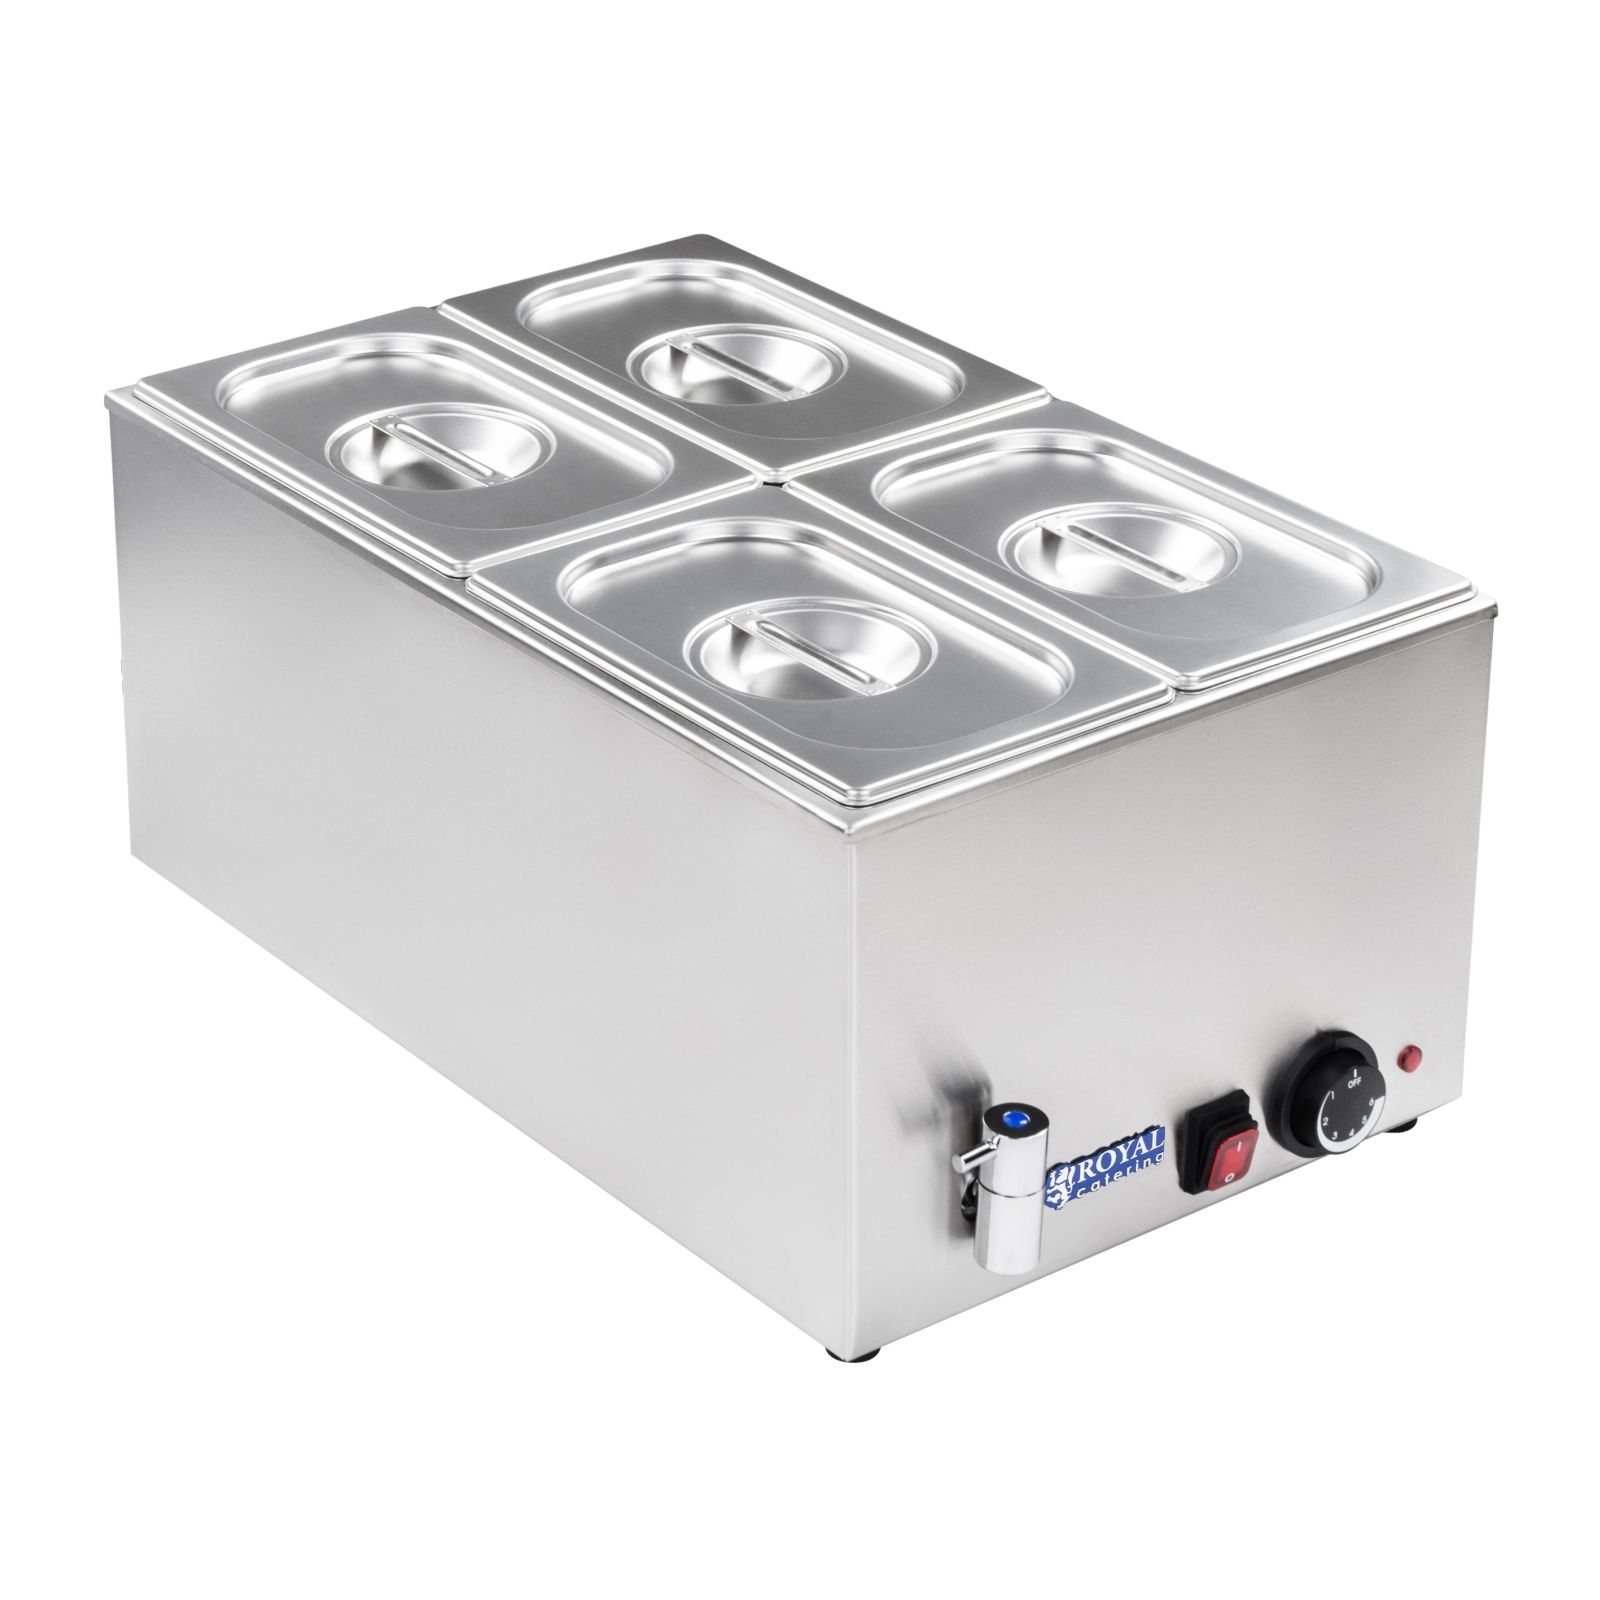 Royal Catering Bain-marie - GN container - 1/4 - drain tap RCBM-1/4-150A-GN